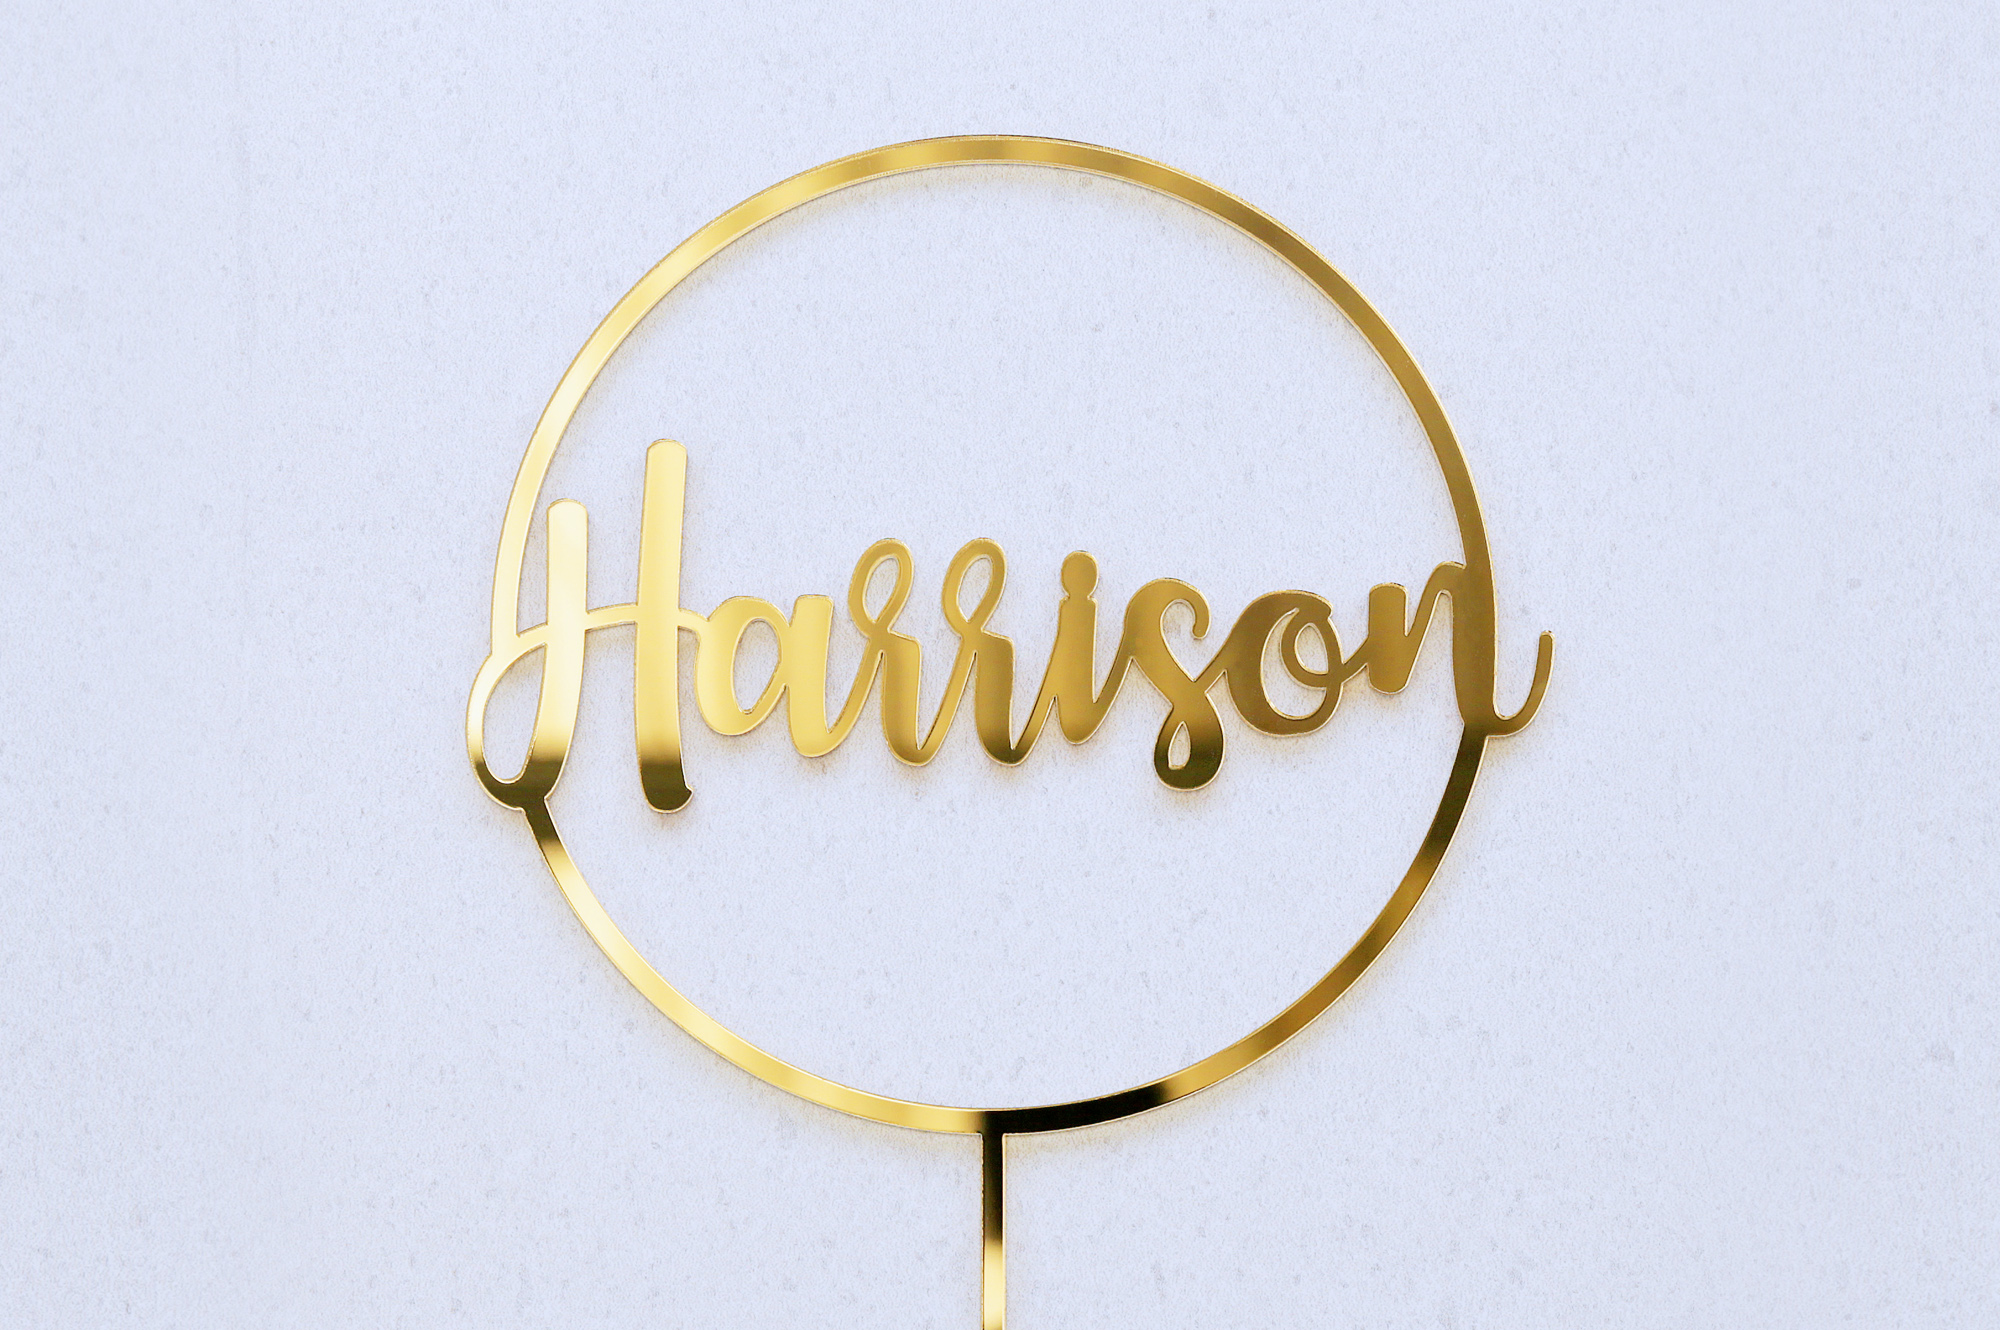 Gold Halo cake topper with Harrison in the centre